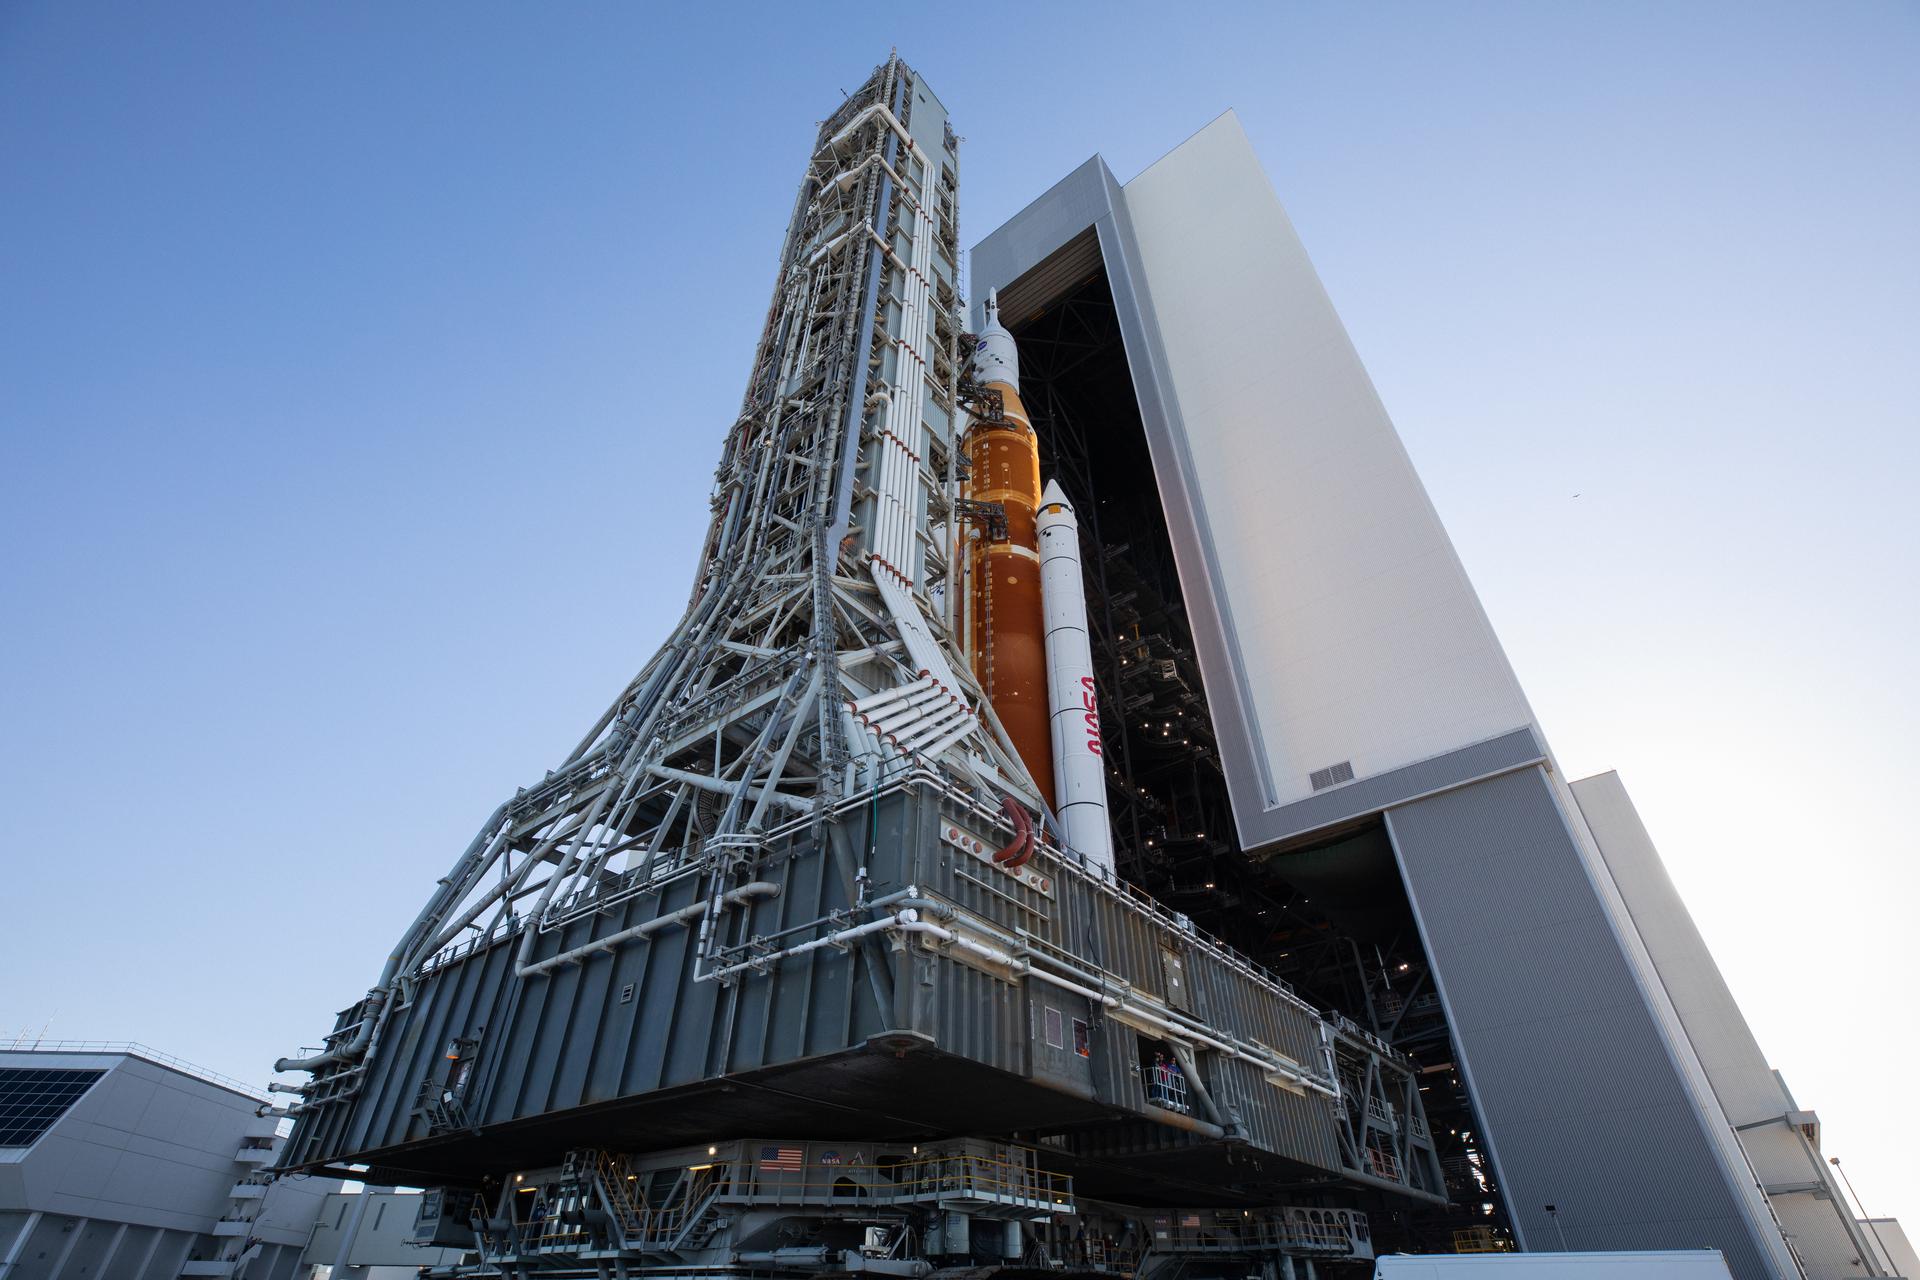 NASA’s Space Launch System rocket, with the Orion capsule atop, slowly rolls out of the Vehicle Assembly Building at the agency’s Kennedy Space Center in Florida on March 17, 2022, on its journey to Launch Complex 39B.